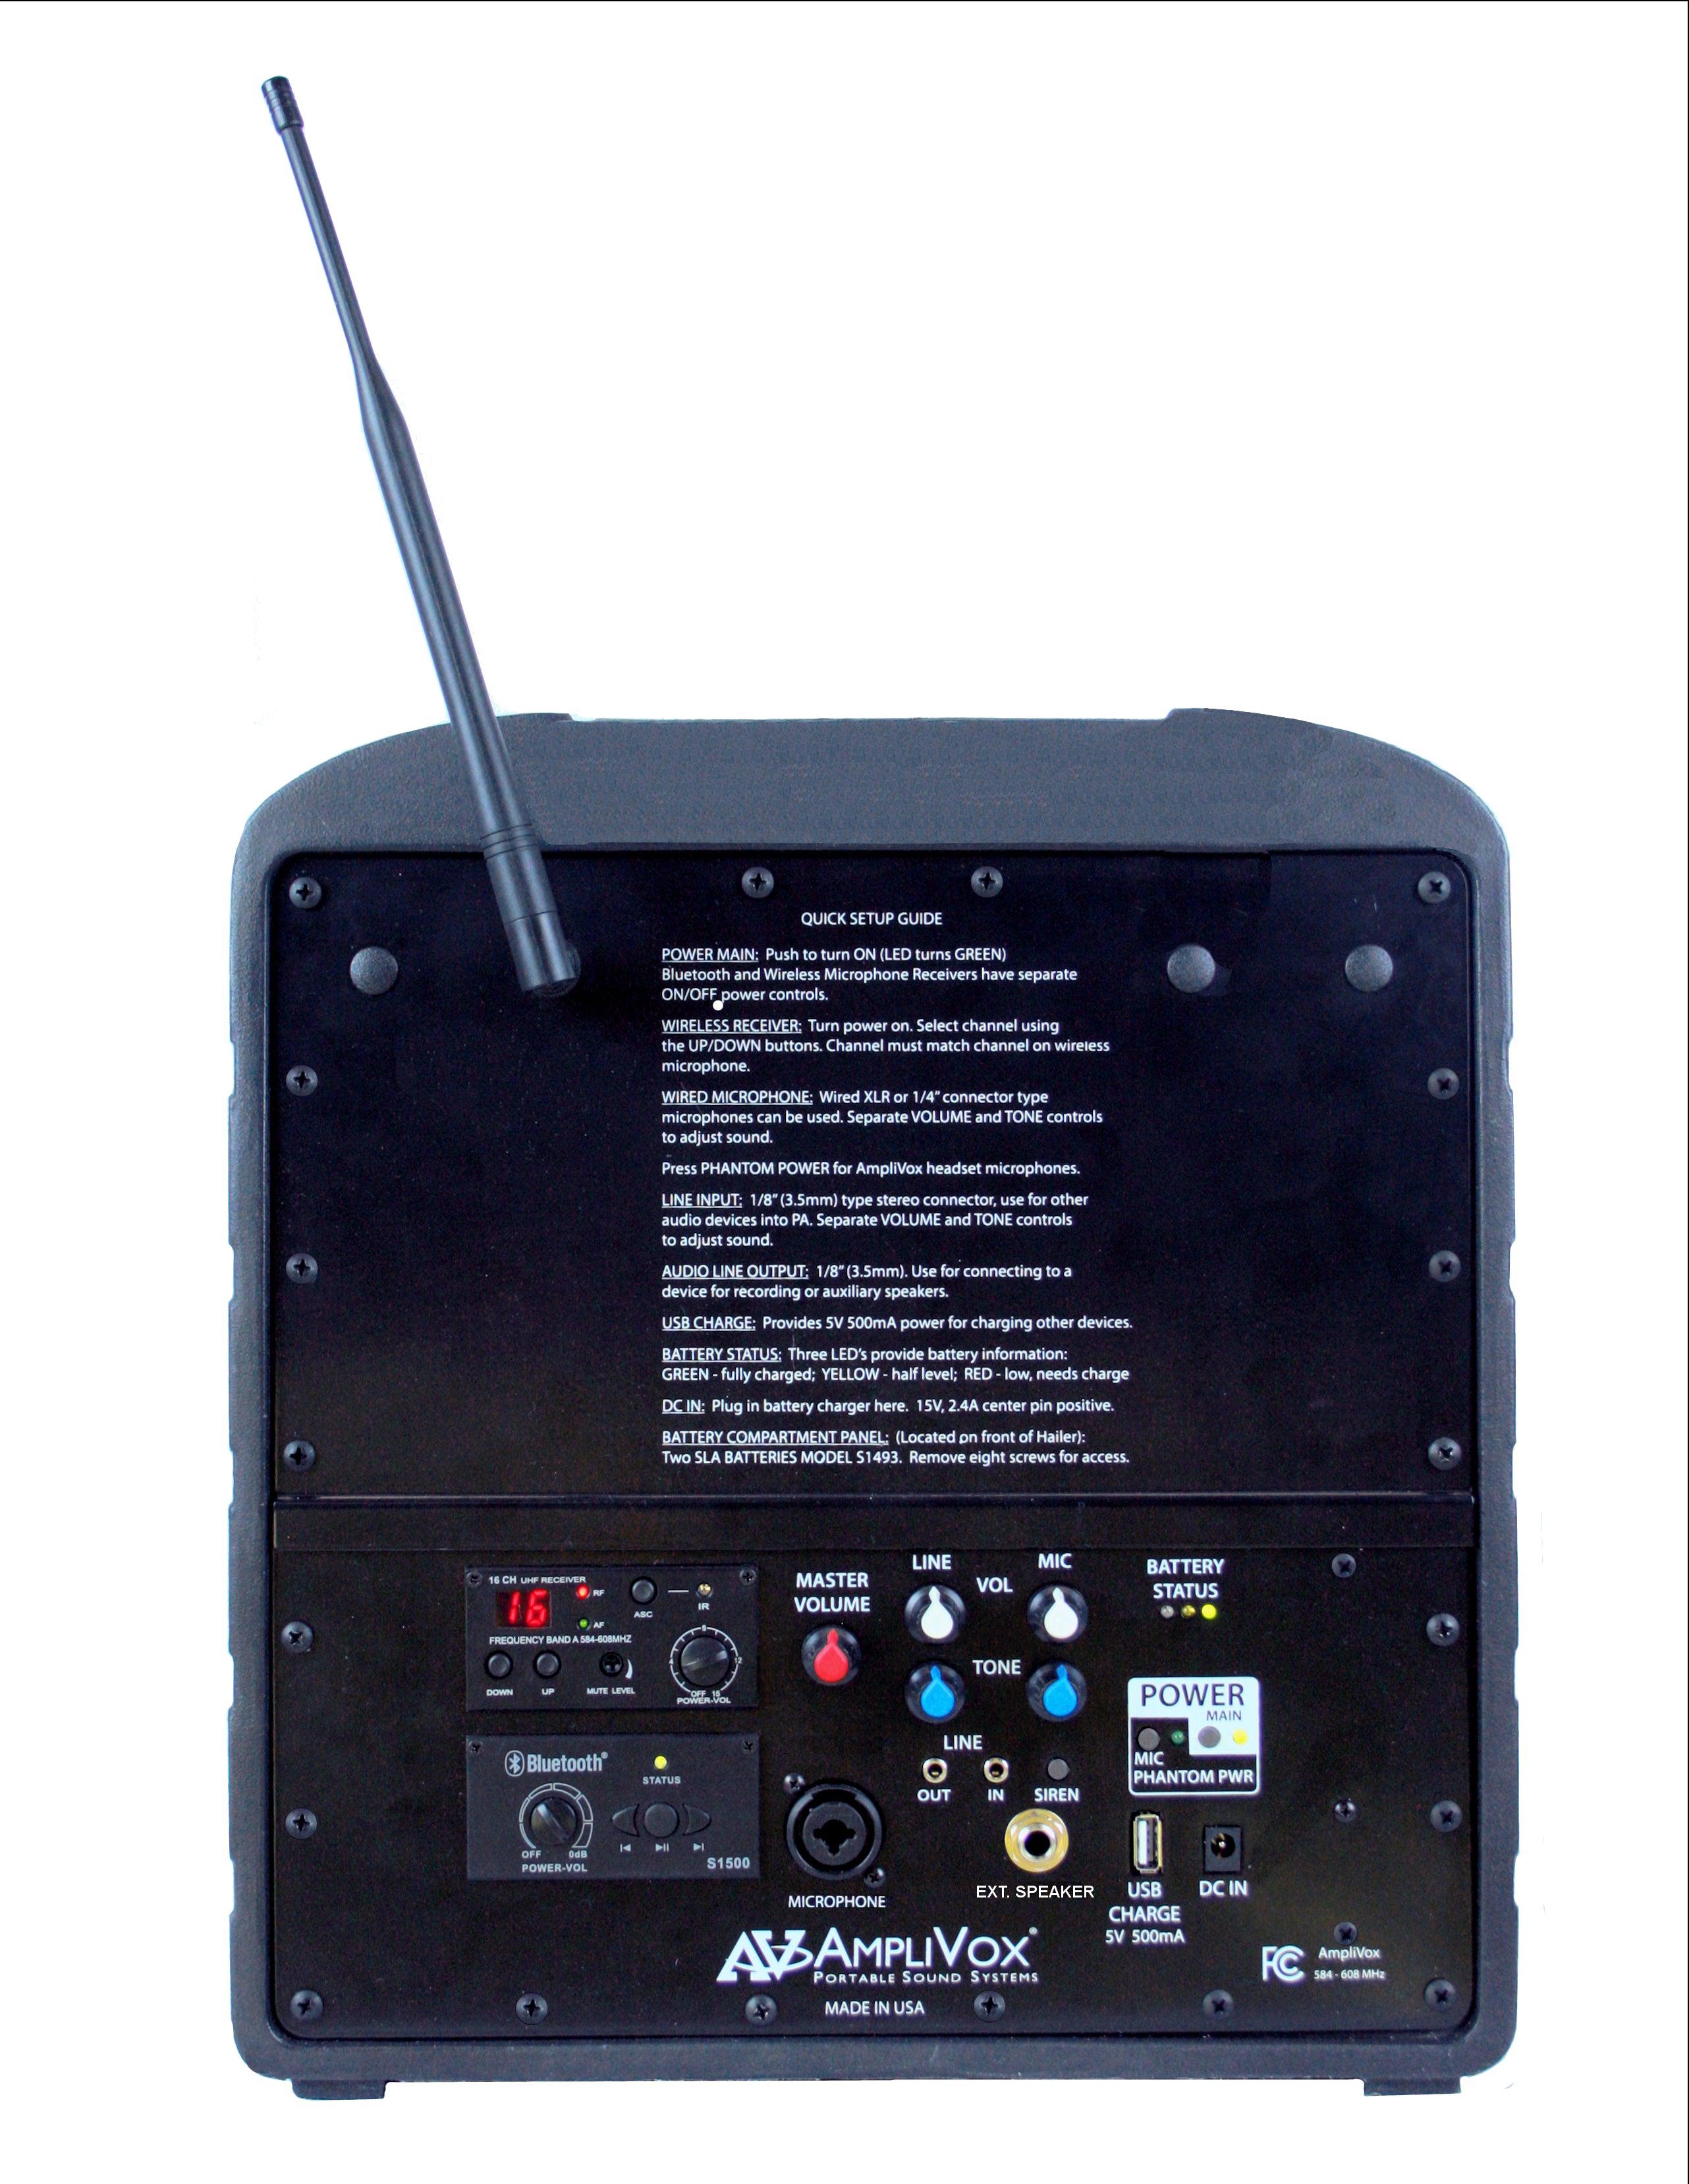 Wireless AirVox PA System by Amplivox (2 Styles)